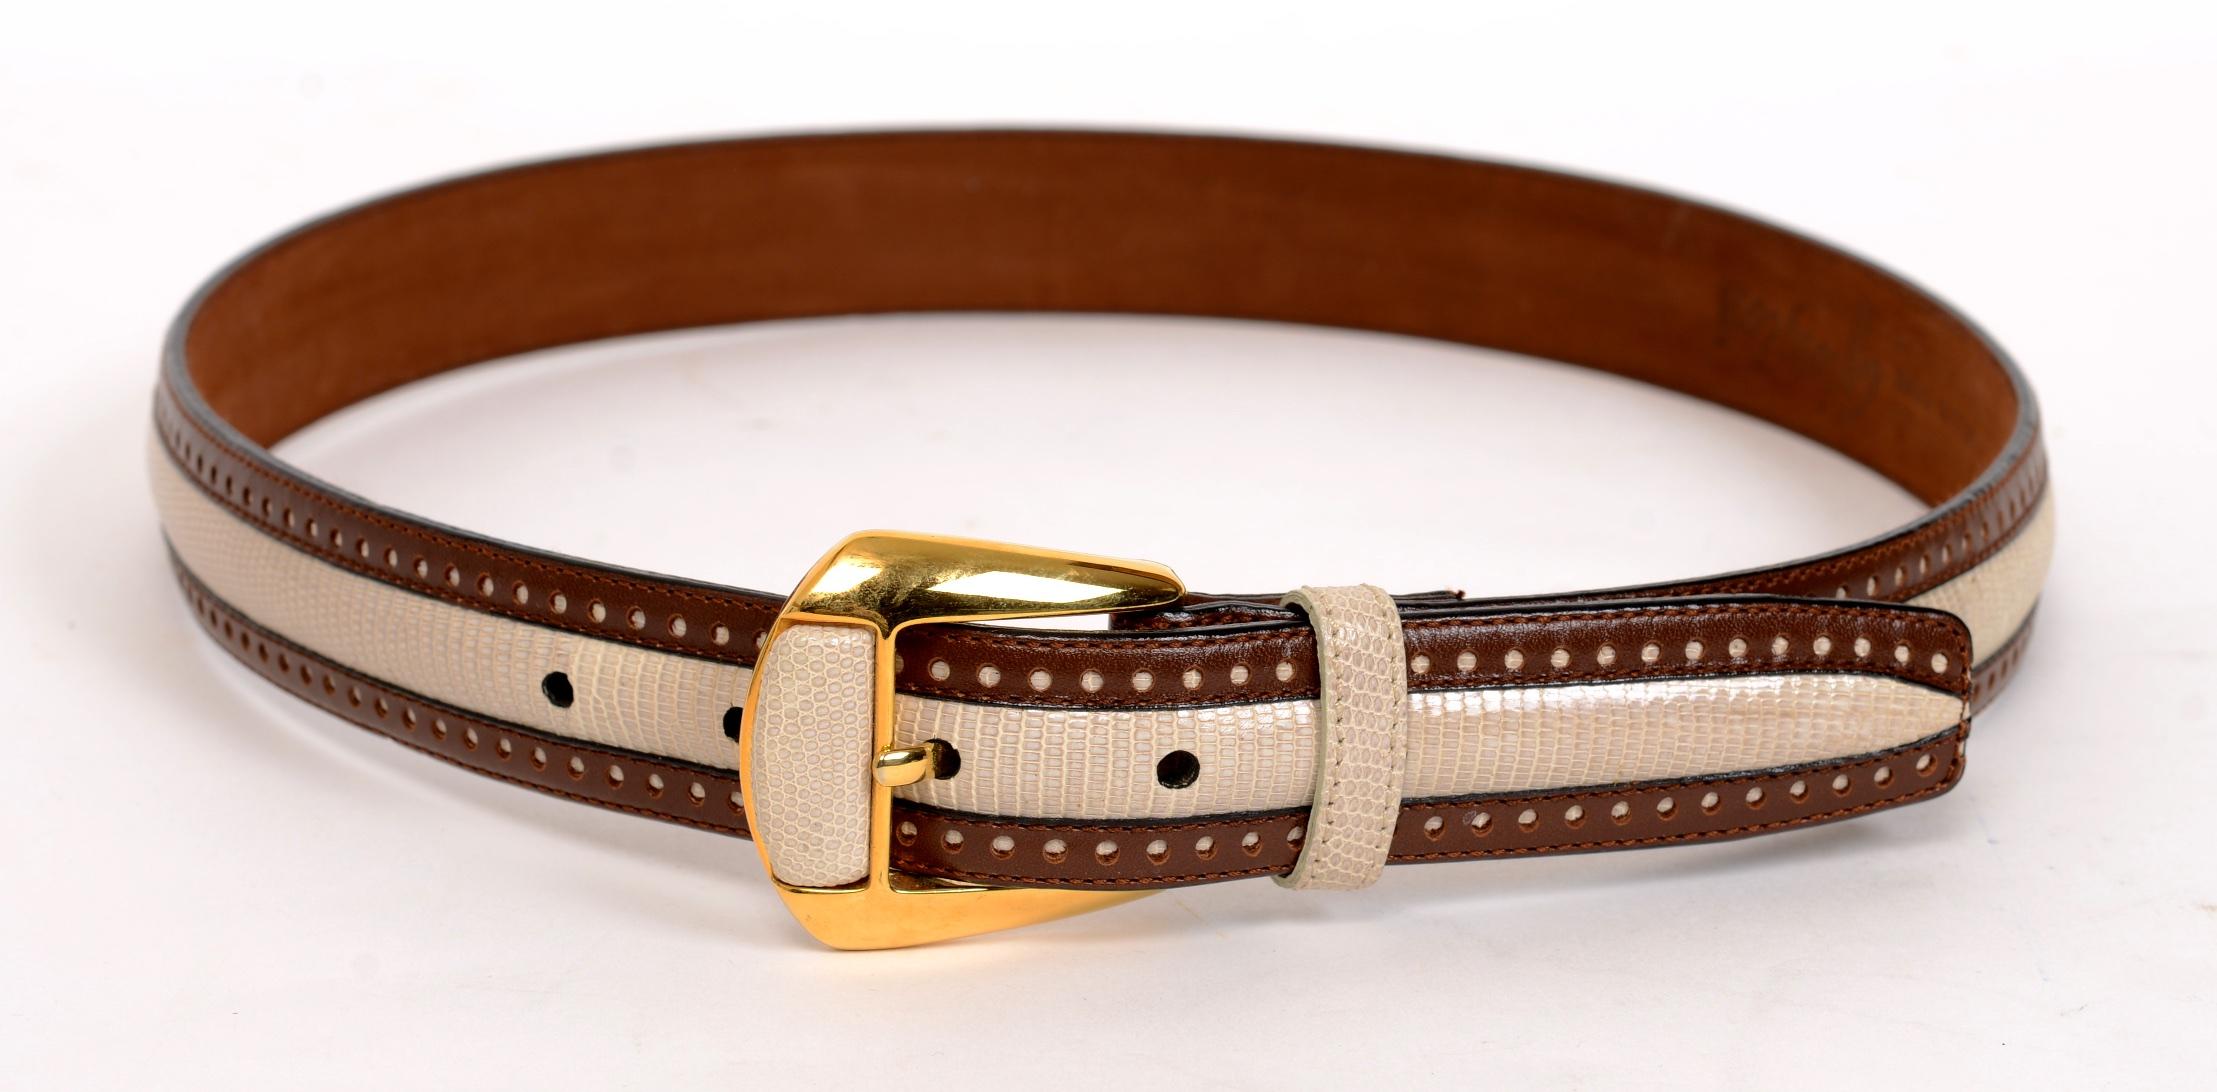 Brown Leather and White Lizard Belt, with Brown Suede Leather Back, by Giorgio's Worth Ave Palm Beach, Brand New. Typical of Giorgio's quality with his typical attention to detail. The buckle is gilt brass with inlaid, matching lizard detail. Brand